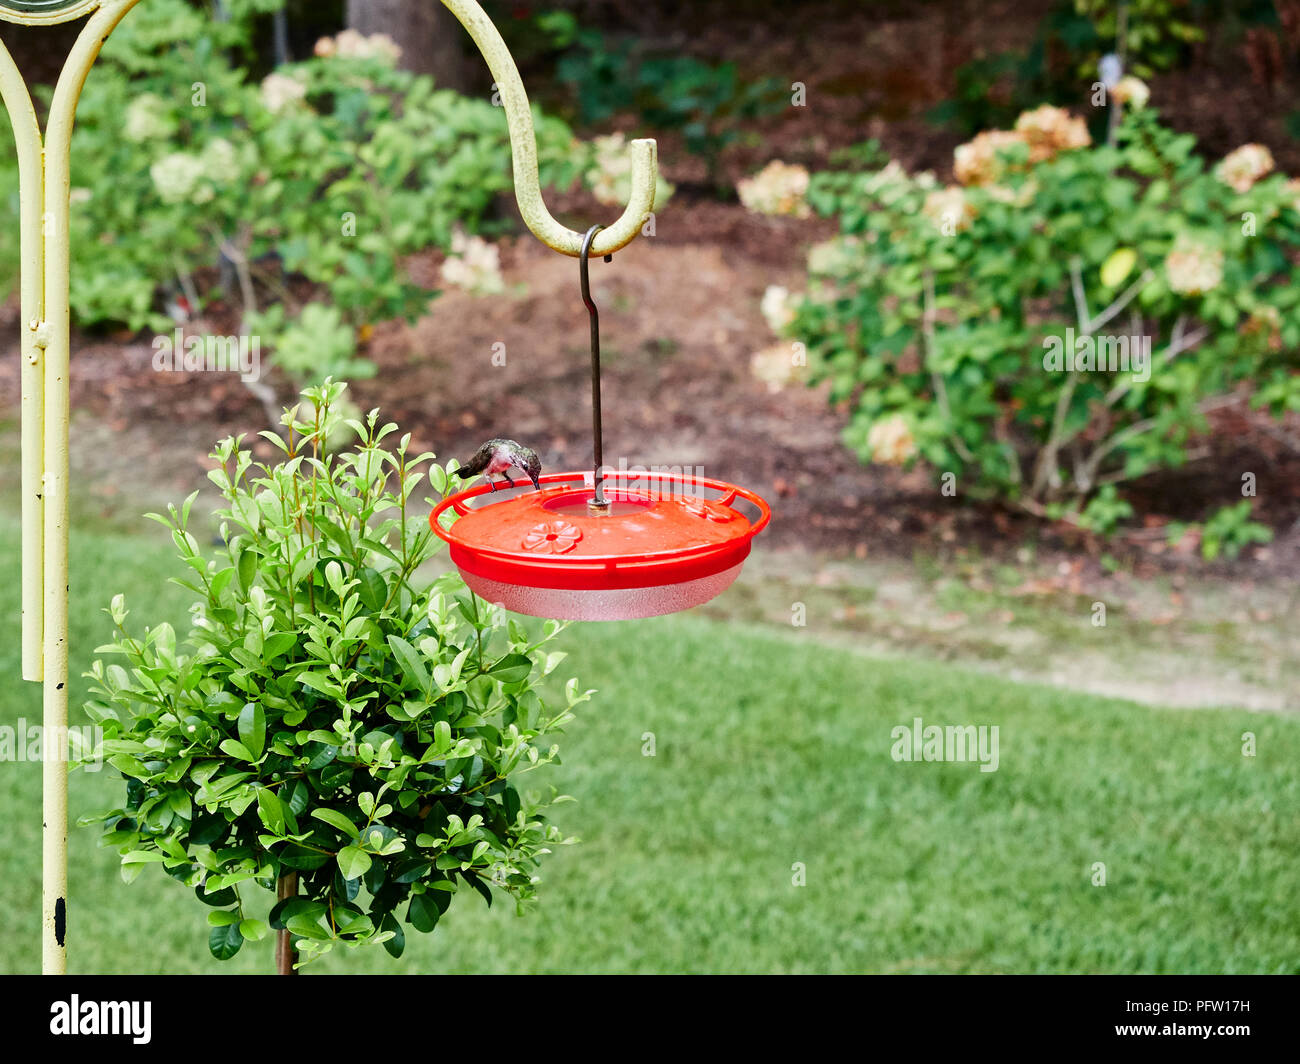 Young juvenile ruby throated hummingbird, Archilochus colubris, resting on a red feeder while it feeds, in a garden or yard in Alabama, USA. Stock Photo